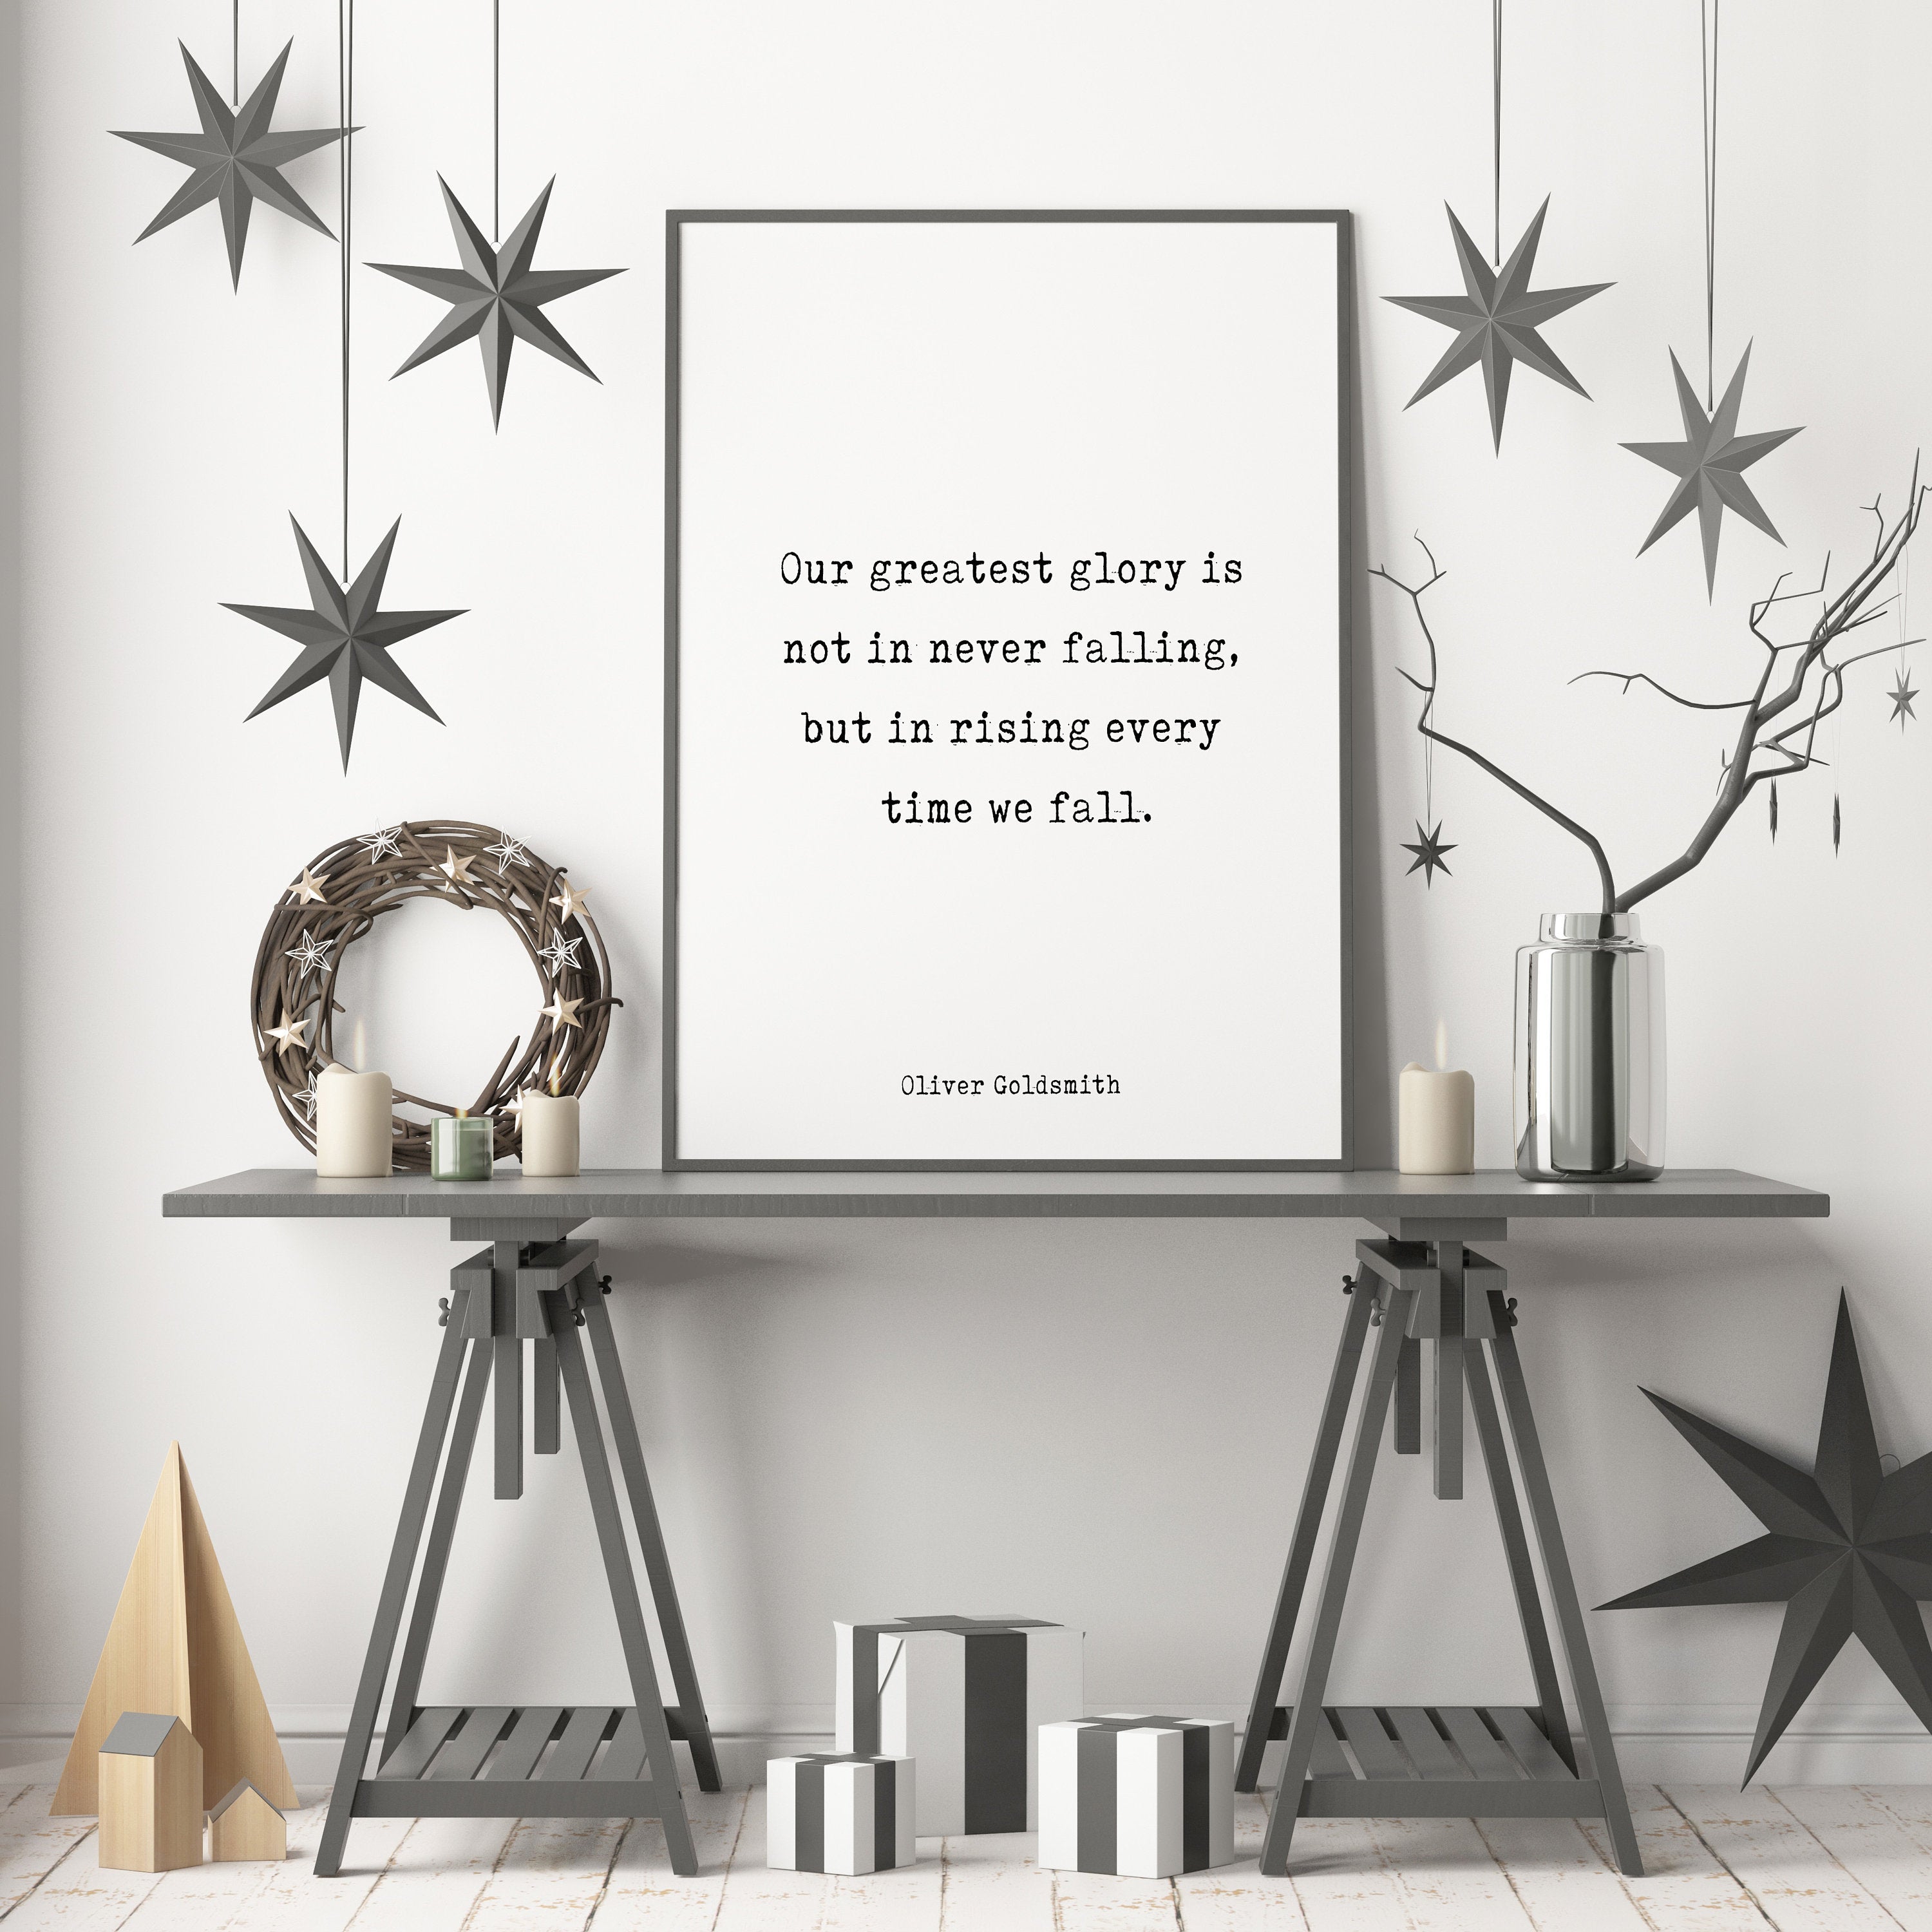 Oliver Goldsmith Quote Print, Glory Is Not In Never Falling But In Rising Every Time We Fall Inspirational Life Quote Black & White Unframed - BookQuoteDecor